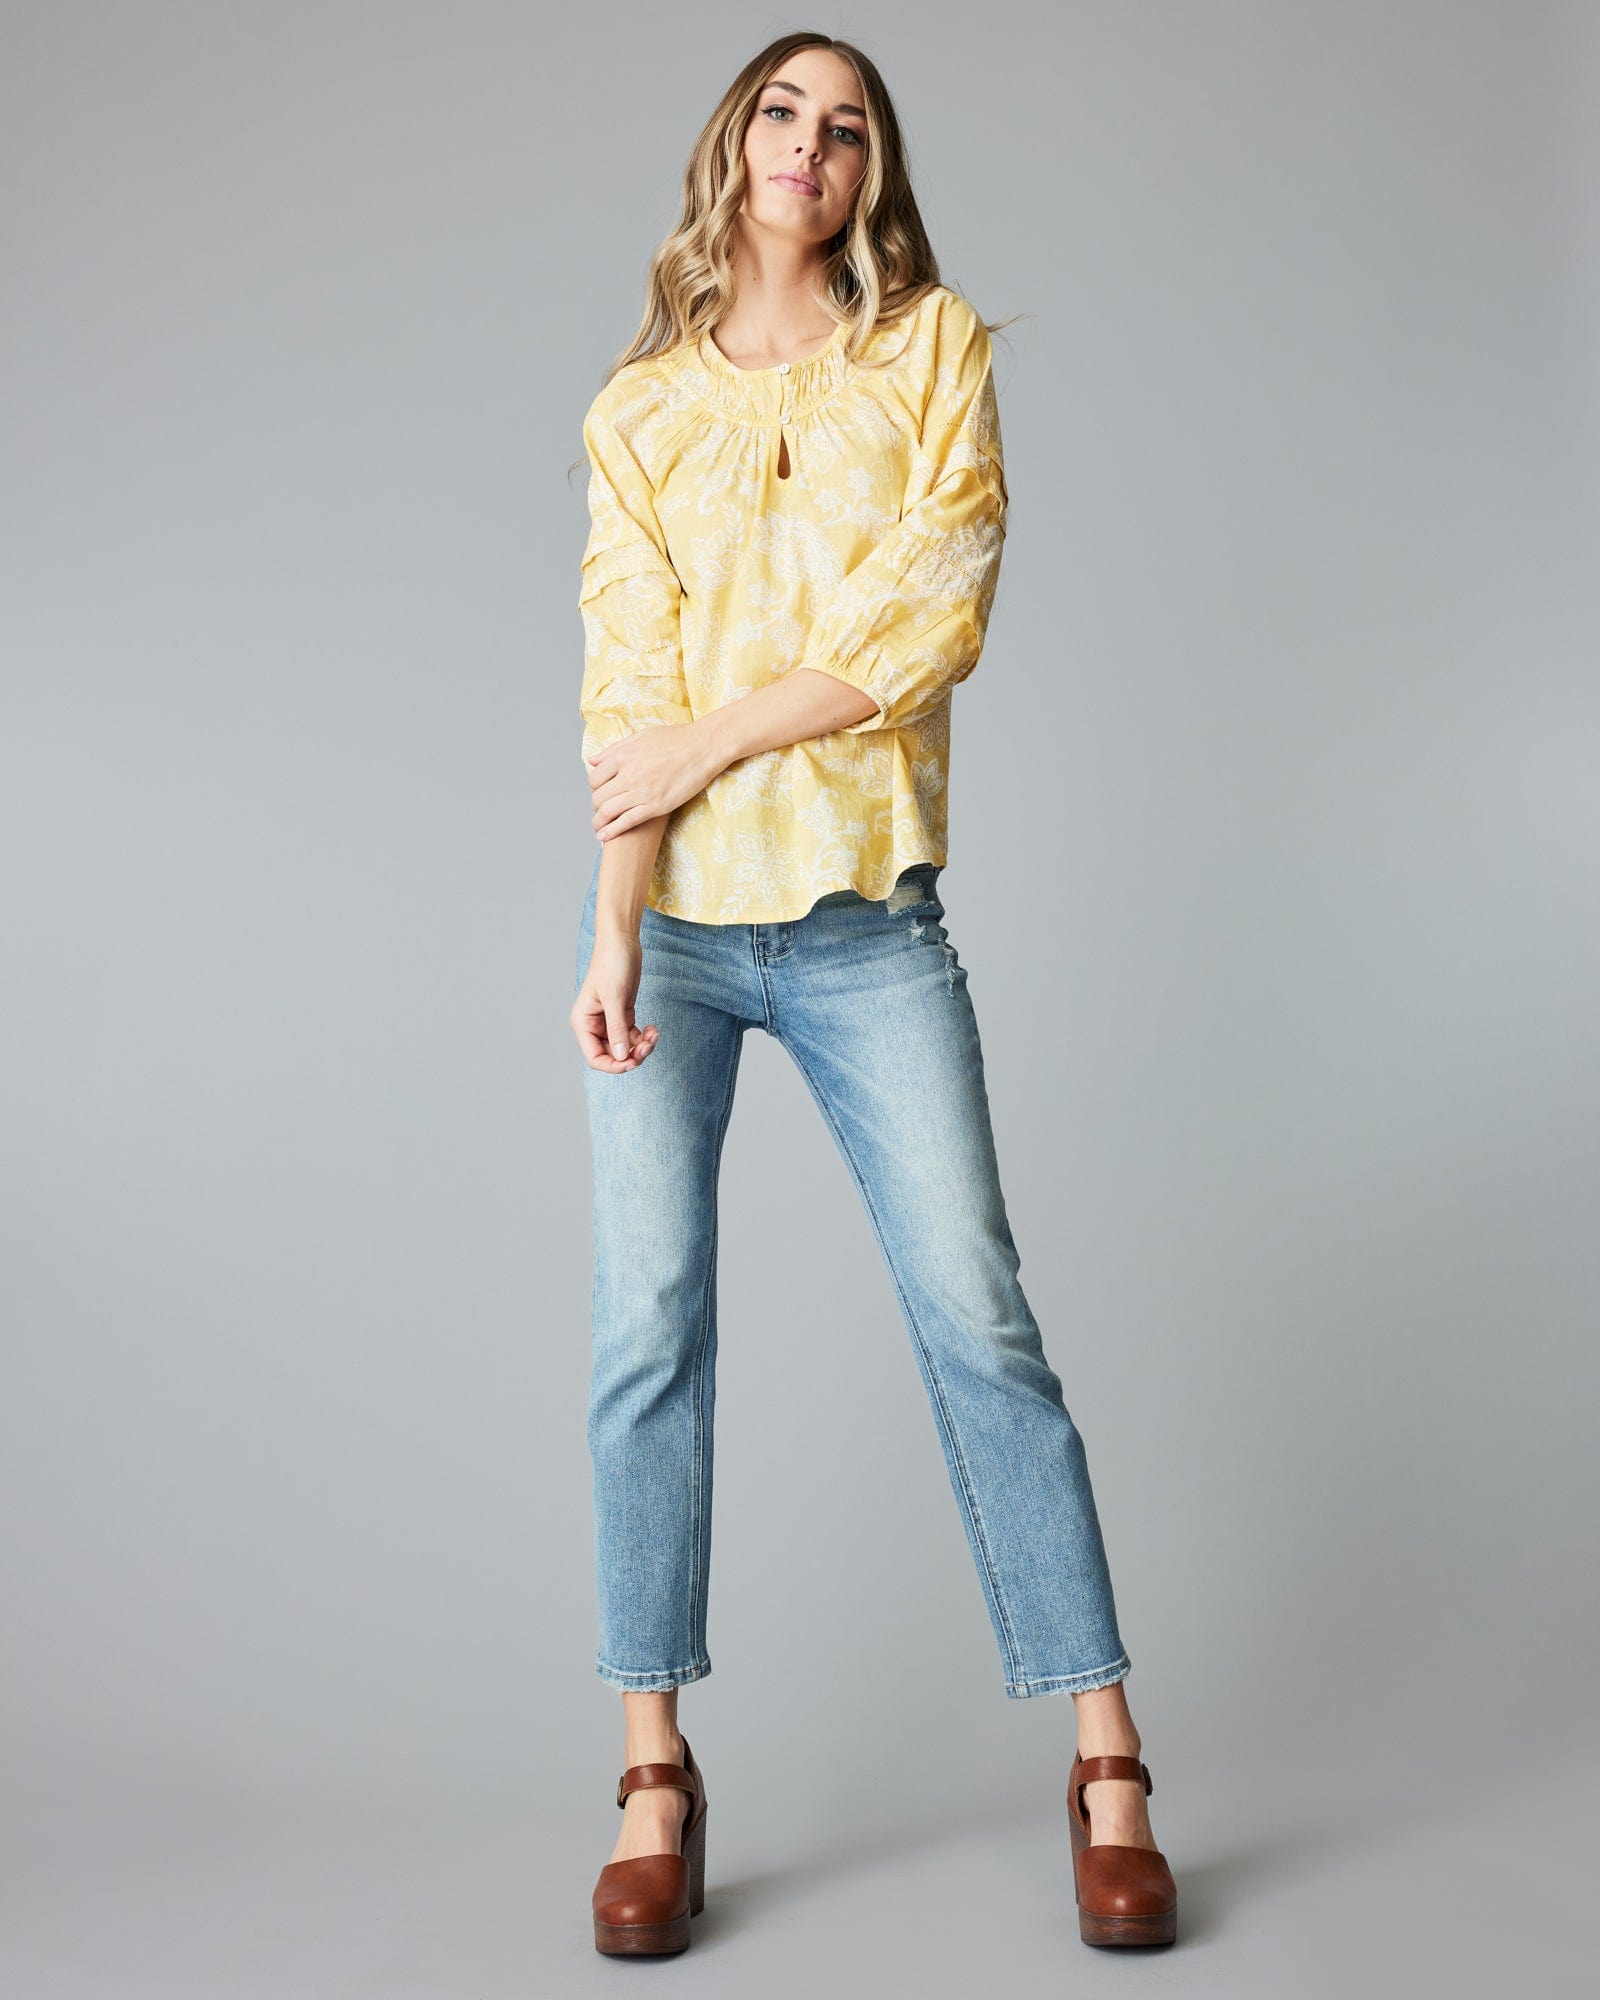 Woman in a 3/4 sleeve, yellow blouse.